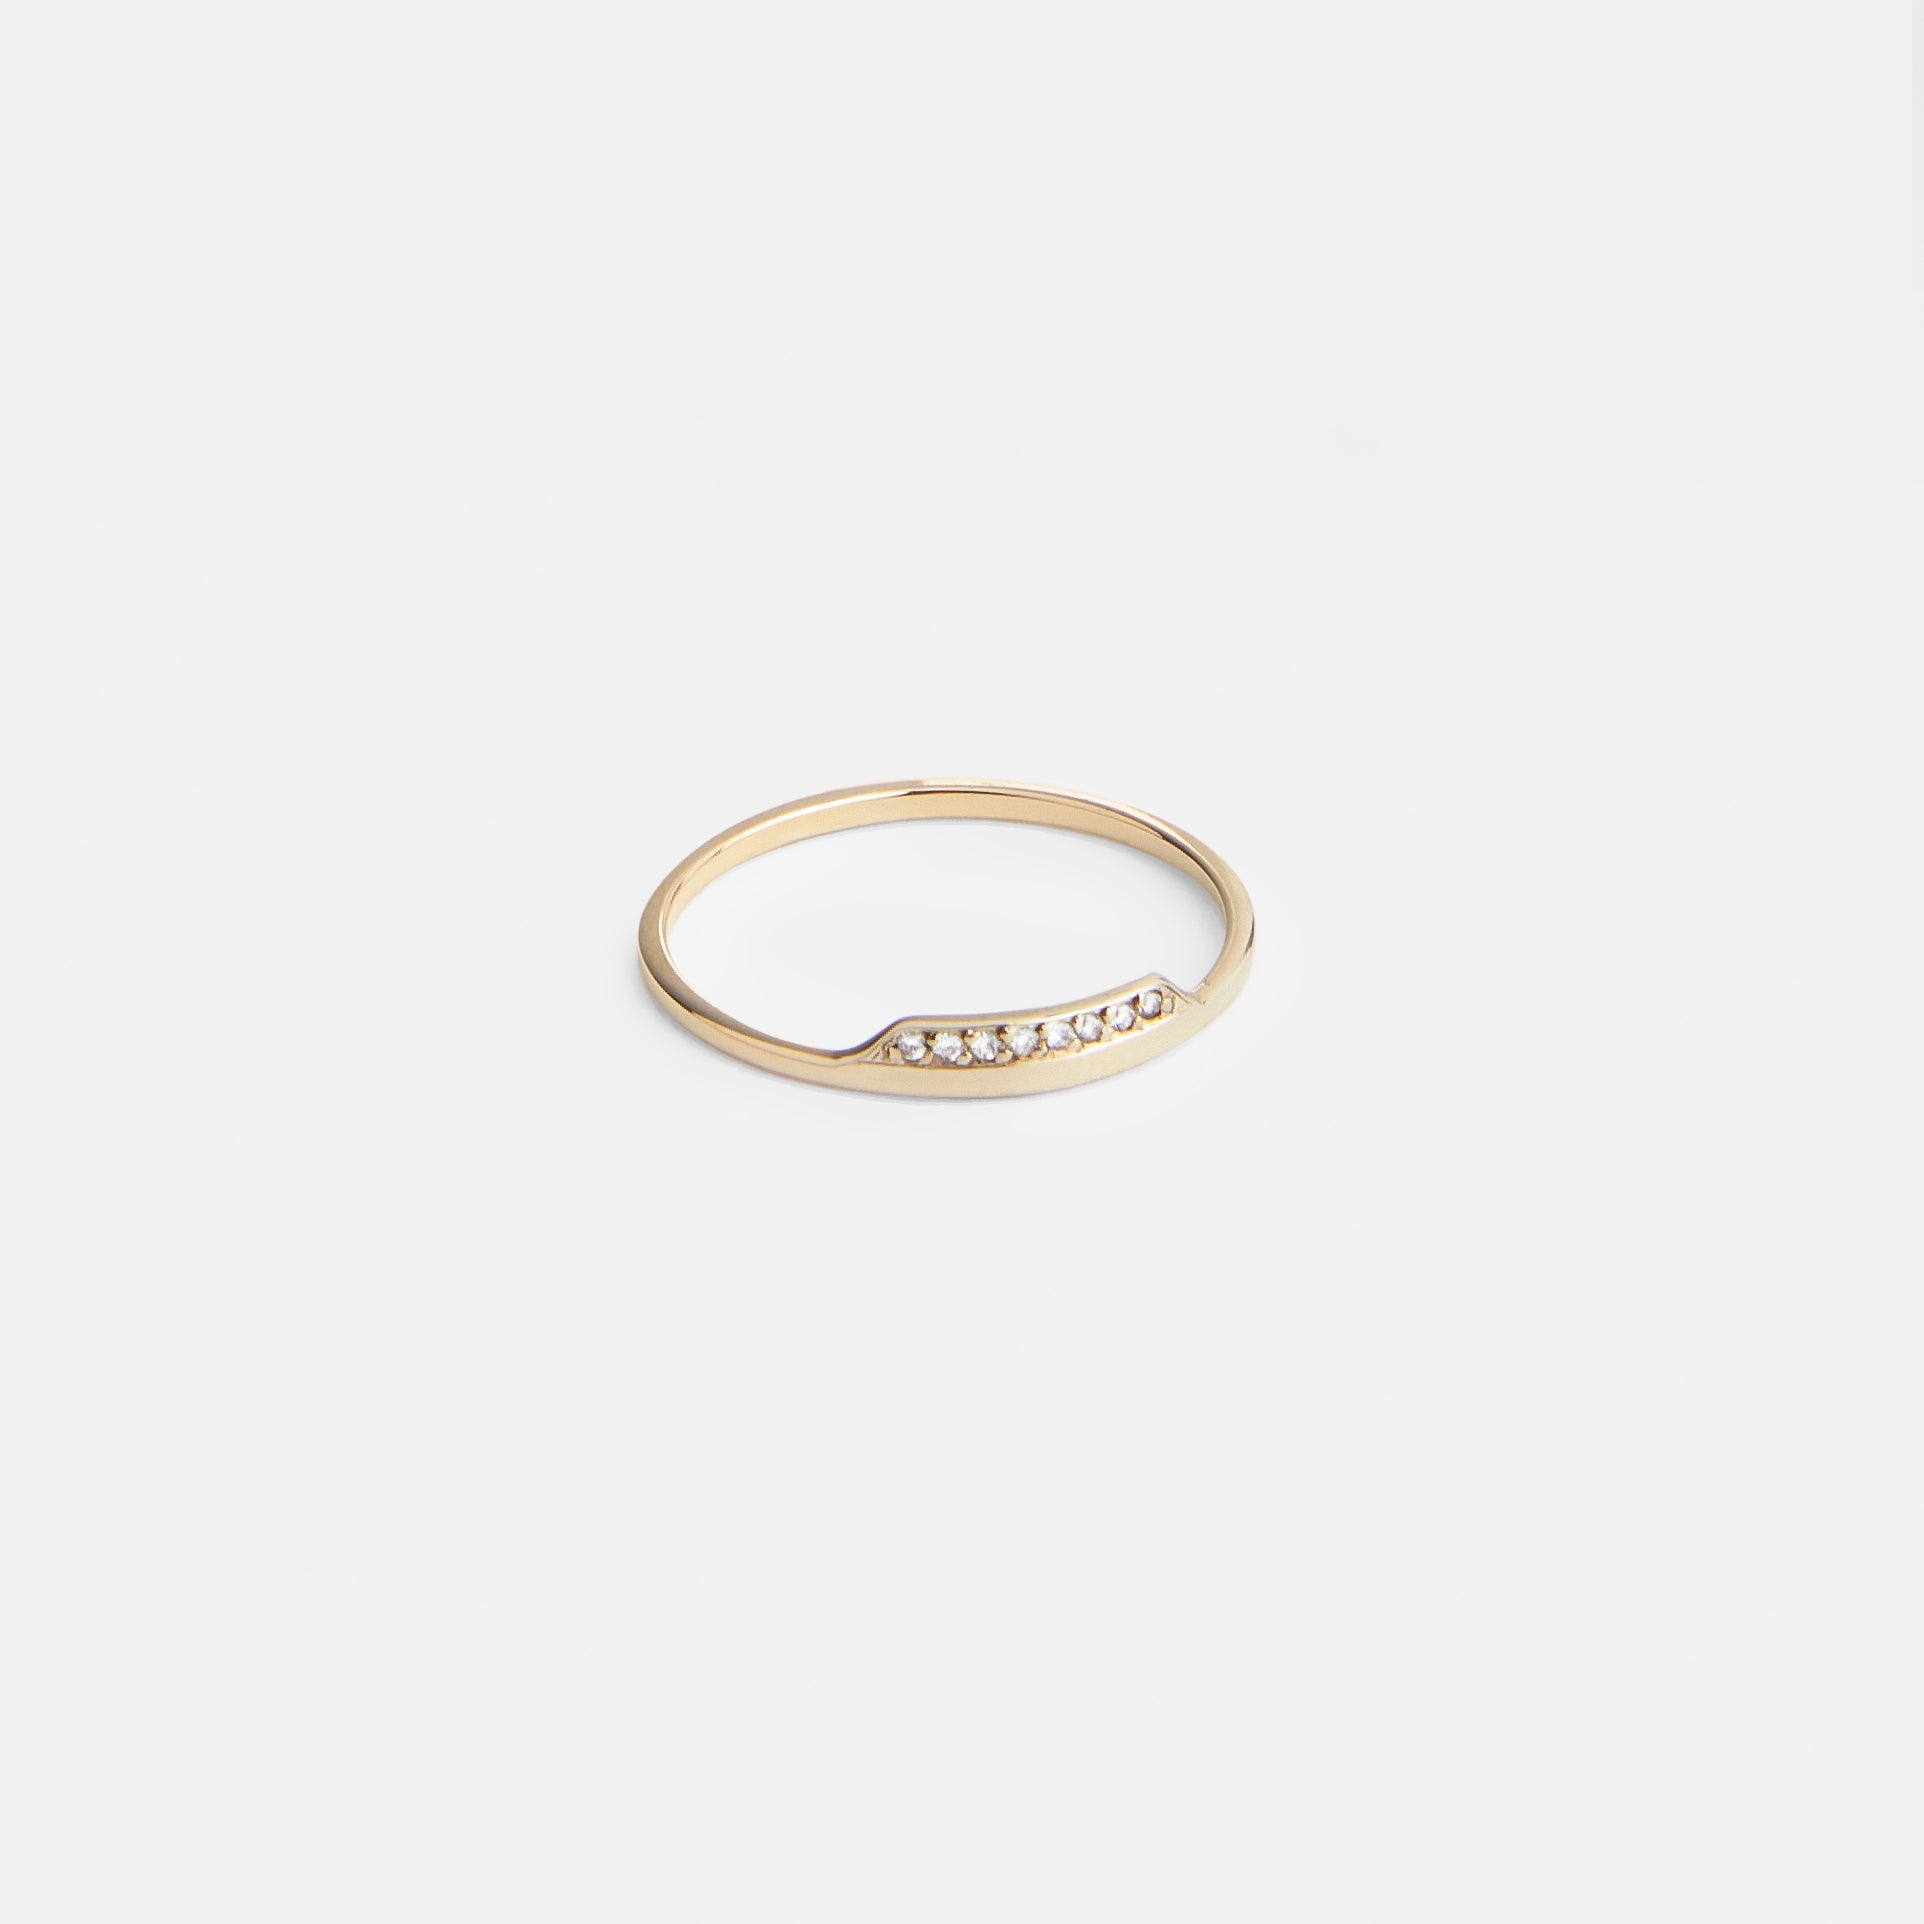 Salo Unique Ring in 14k Gold set with White Diamonds By SHW Fine Jewelry NYC